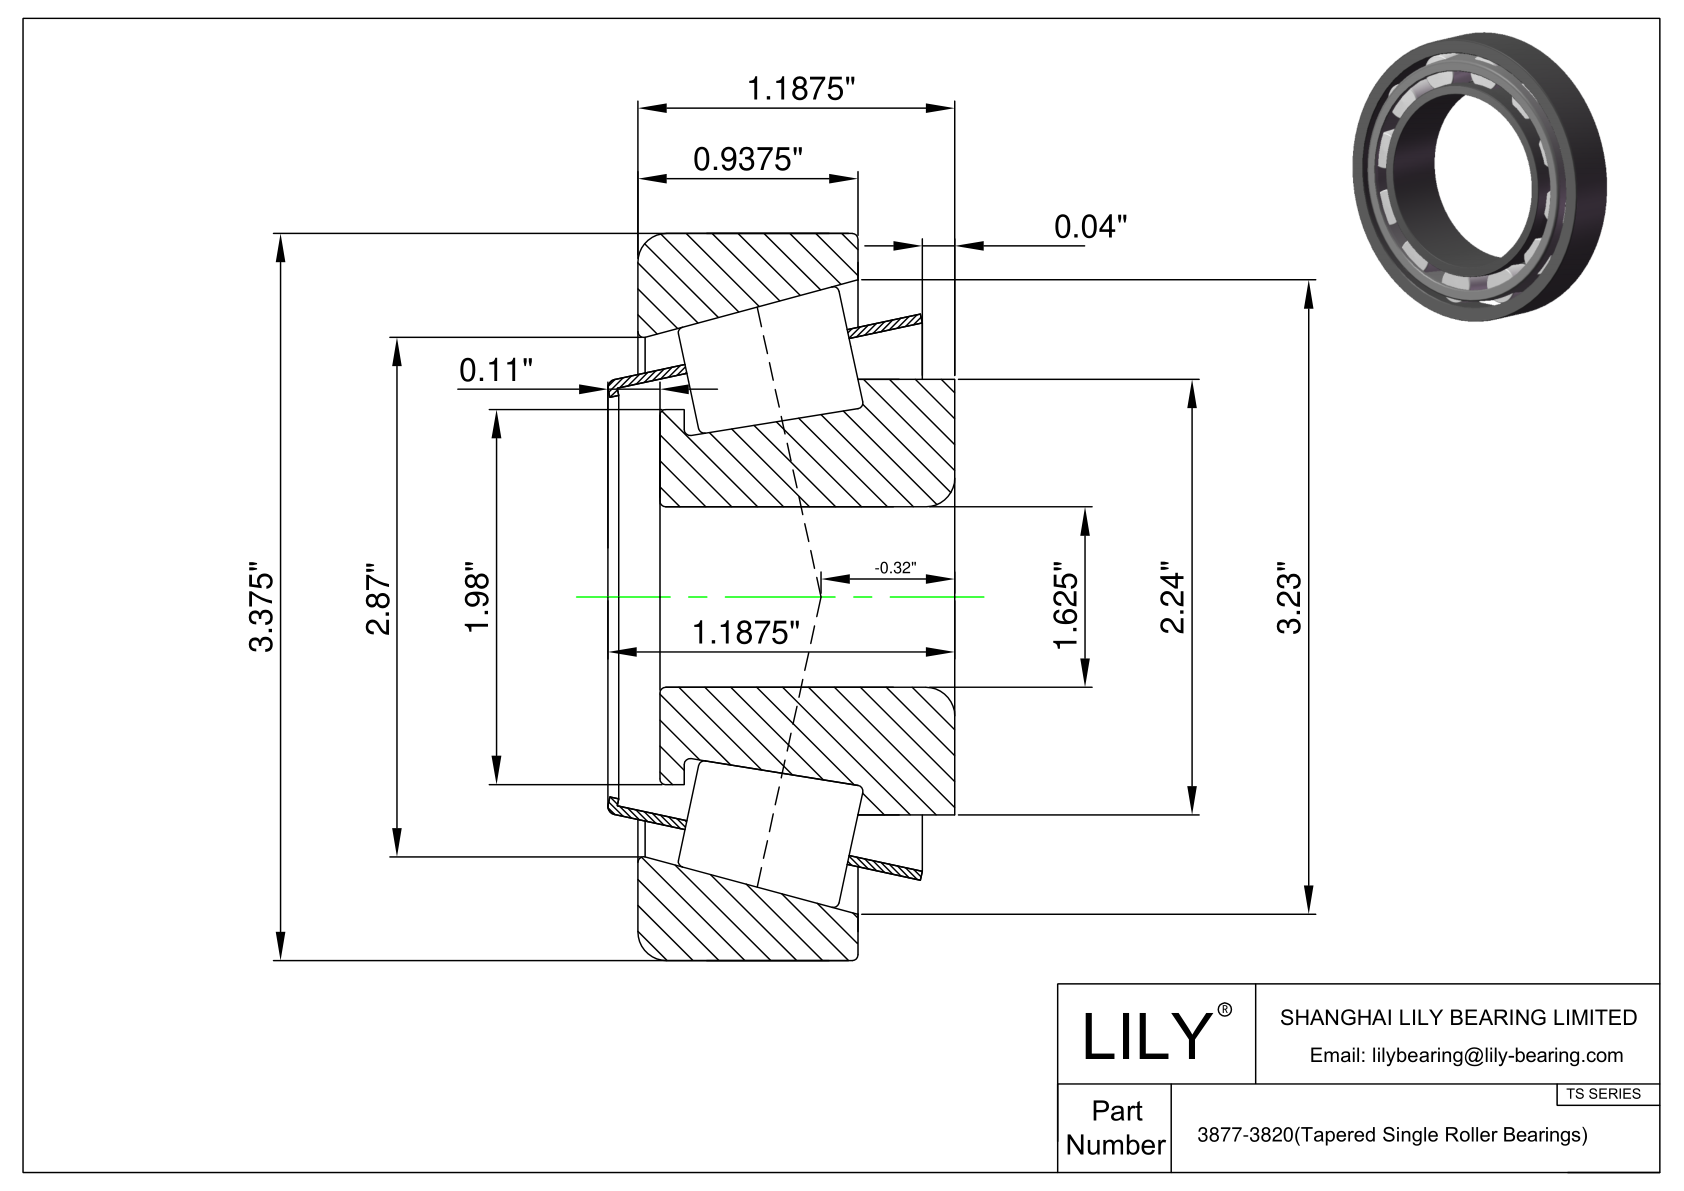 3877-3820 TS (Tapered Single Roller Bearings) (Imperial) cad drawing